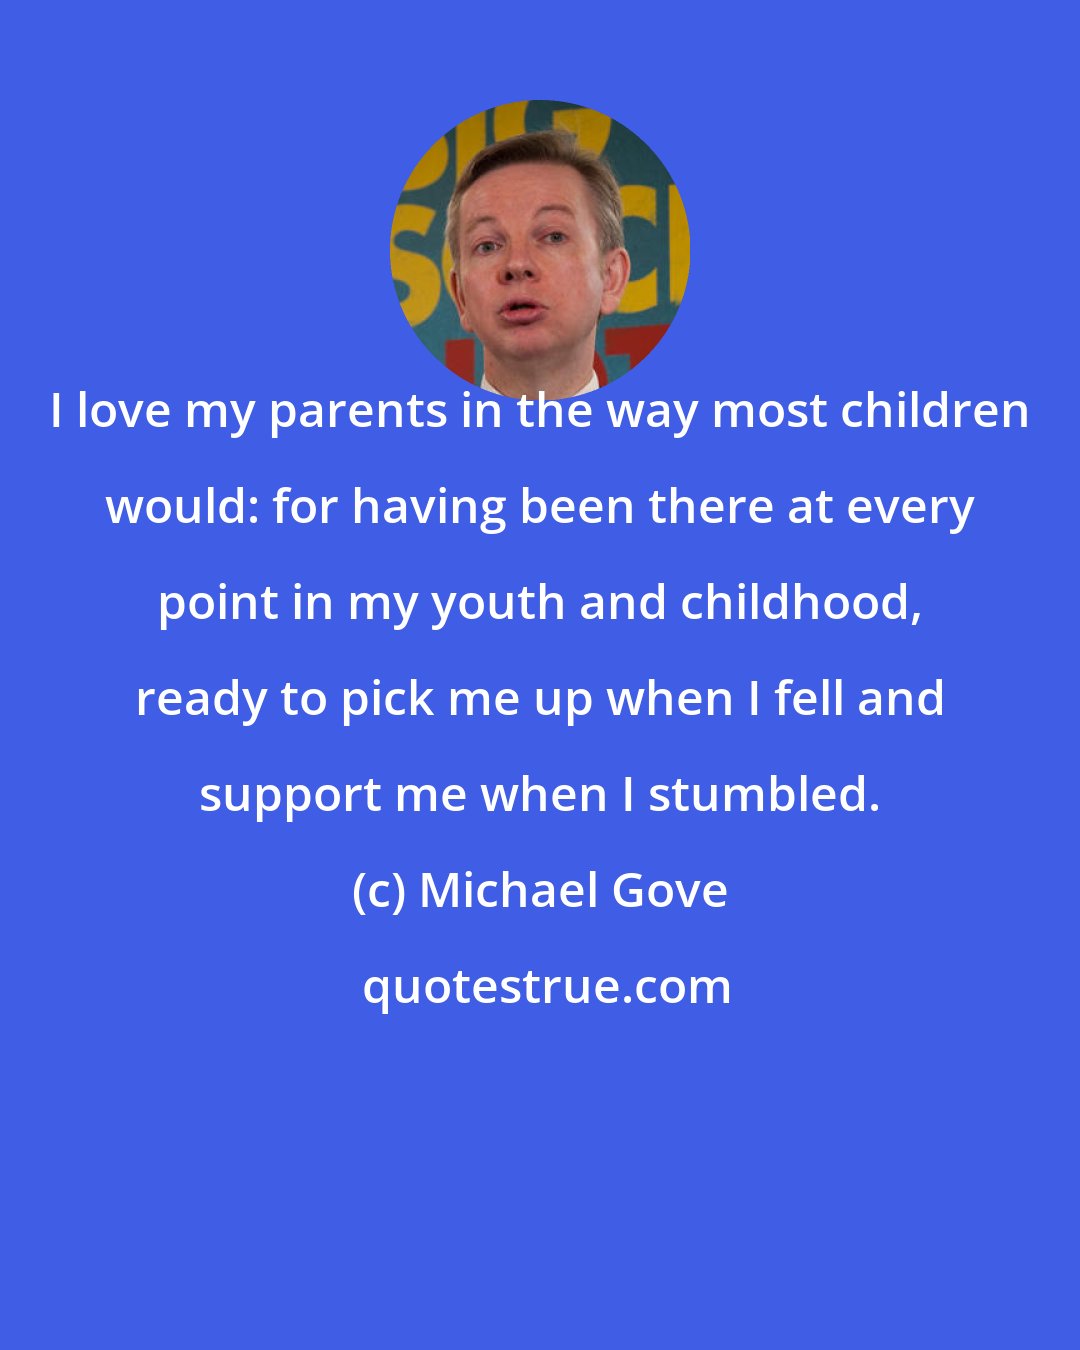 Michael Gove: I love my parents in the way most children would: for having been there at every point in my youth and childhood, ready to pick me up when I fell and support me when I stumbled.